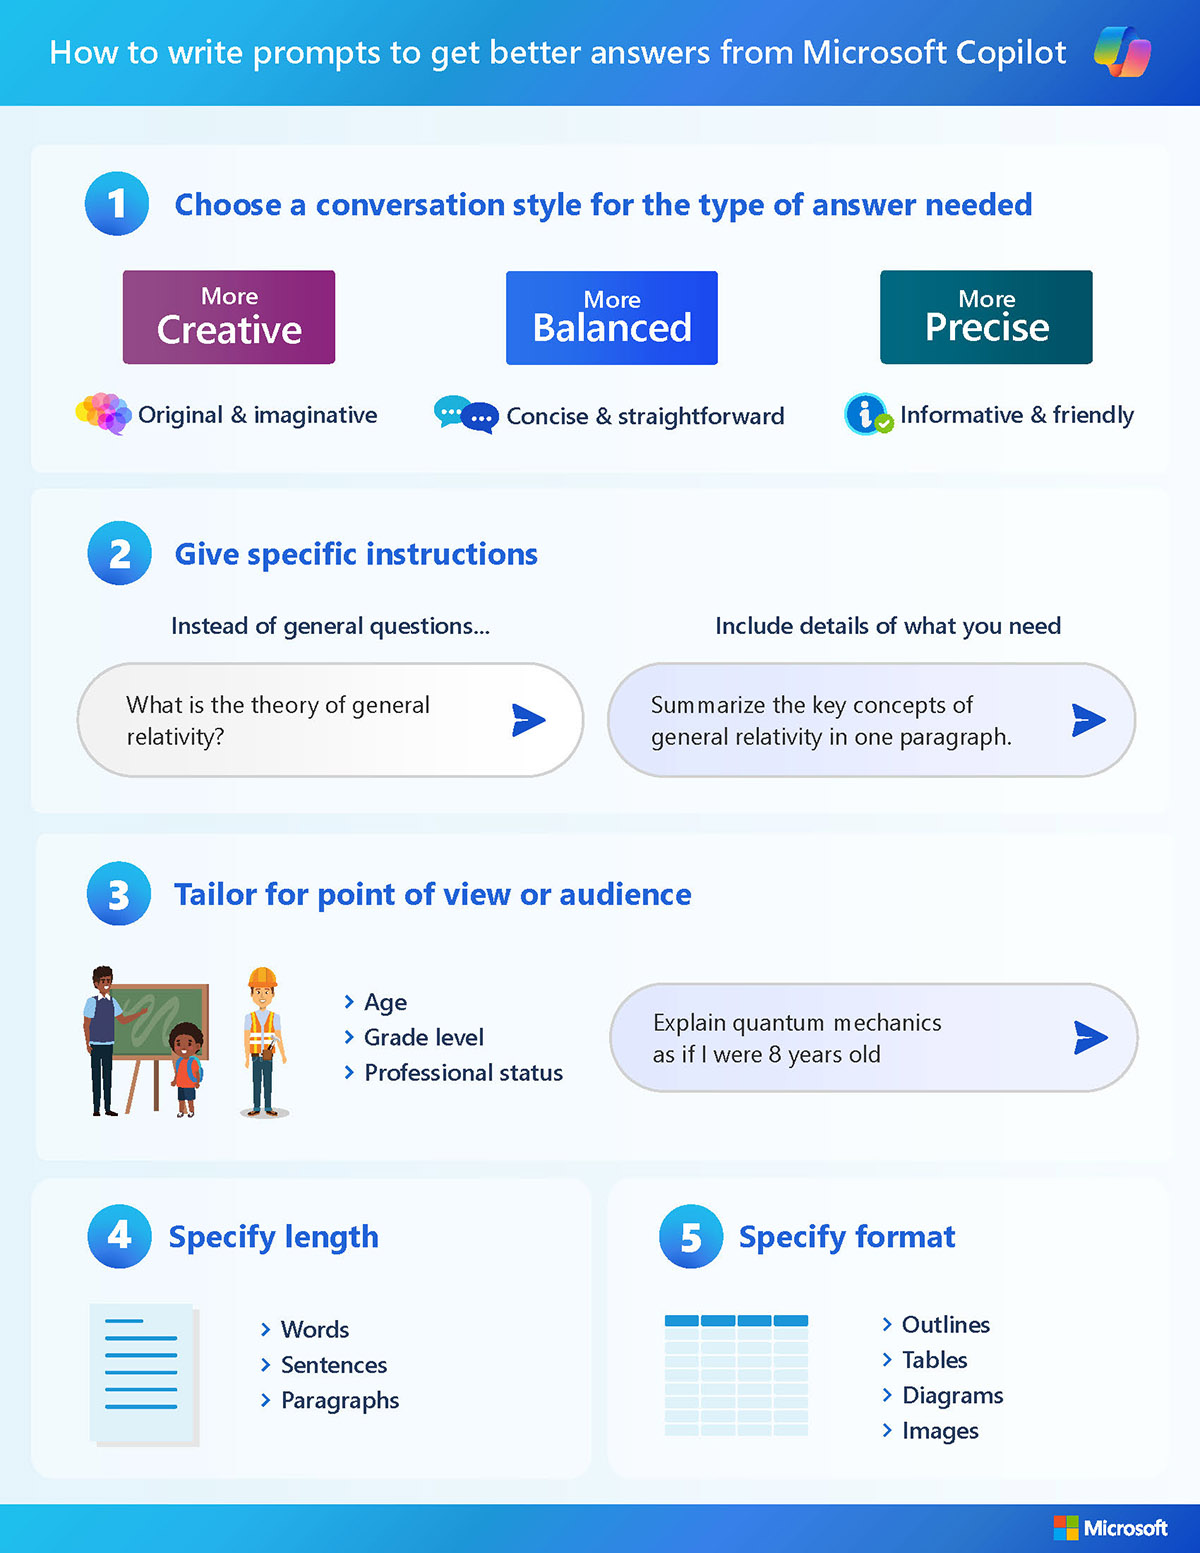 An infographic that explains how to craft effective prompts for AI tools and provides five key elements: conversation style, specific instructions, tailor for audience, specify length, specify format.